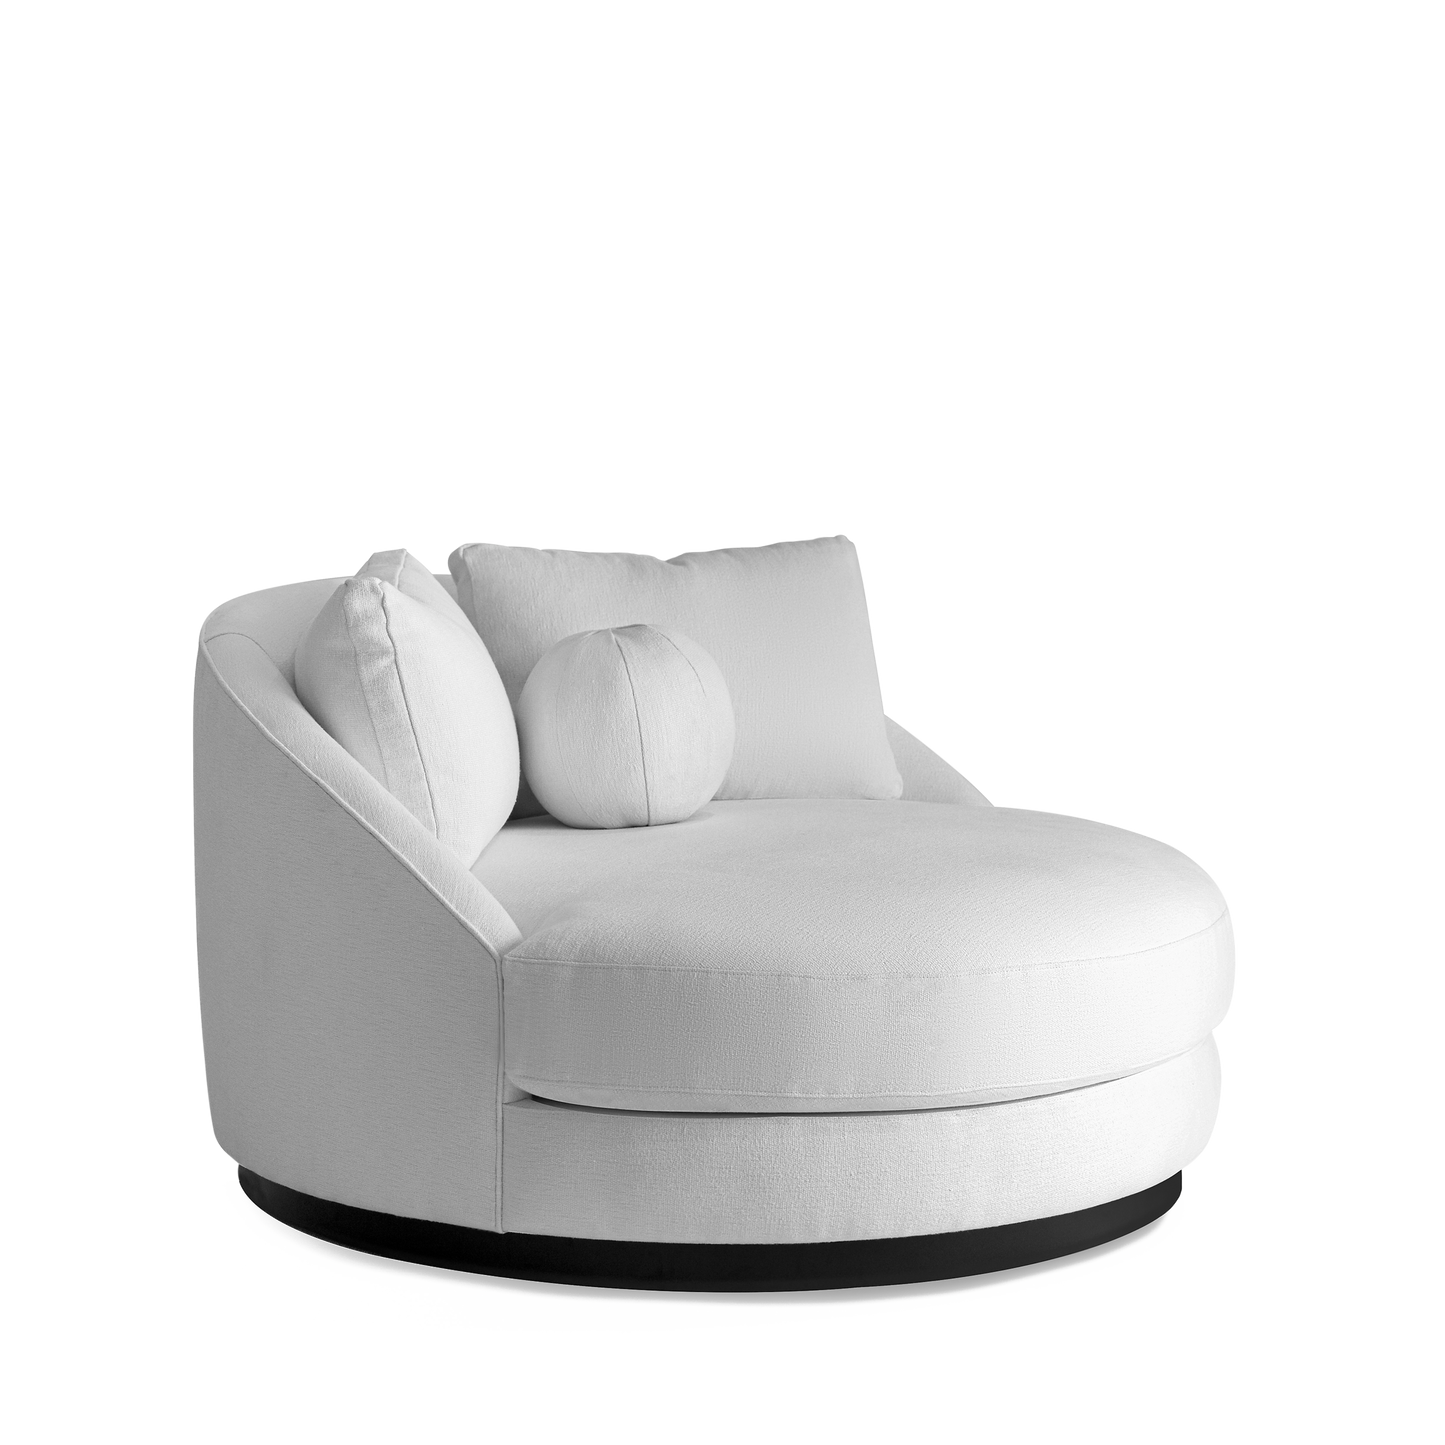 SIESTA Lounge Bed with linara white textile 